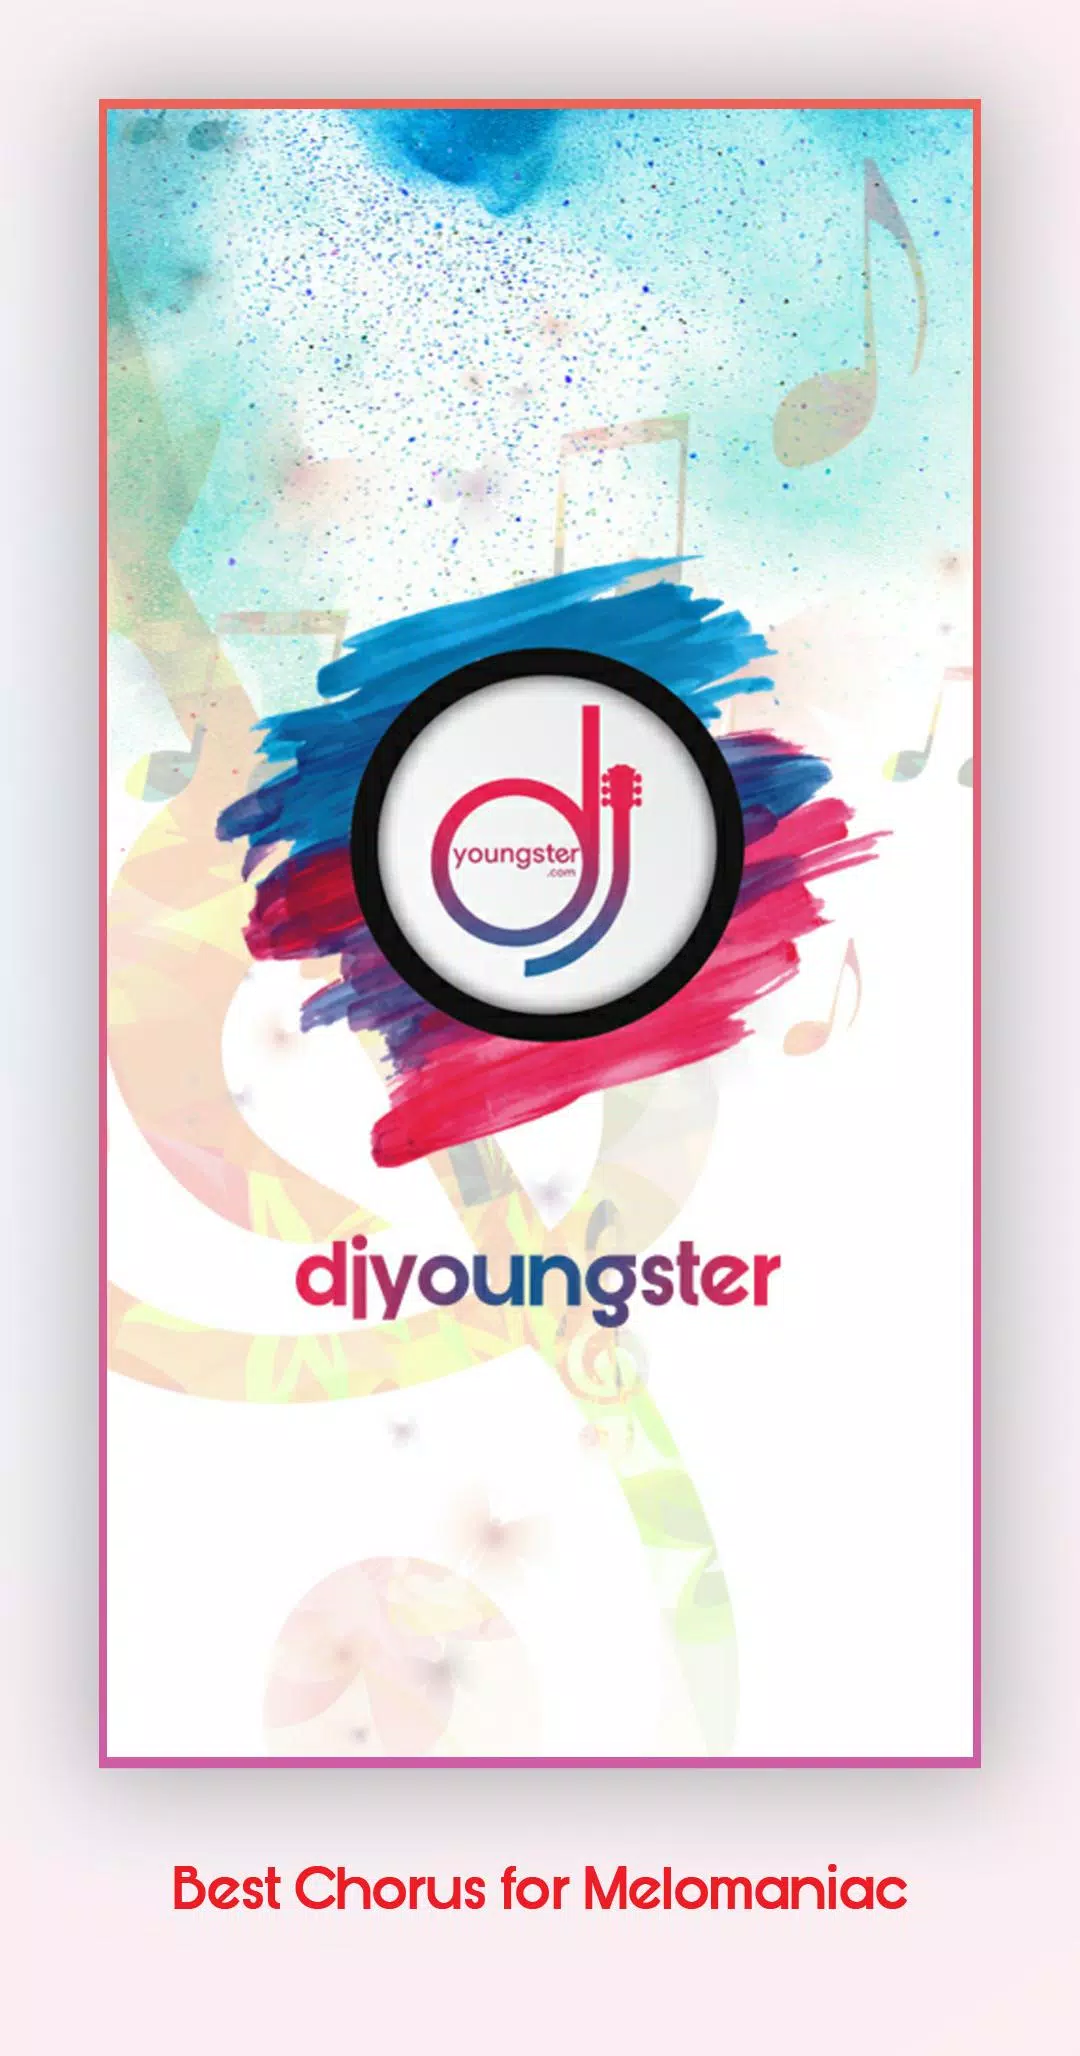 Djyoungster - New Punjabi Song 2020, पंजाबी गाने APK for Android Download